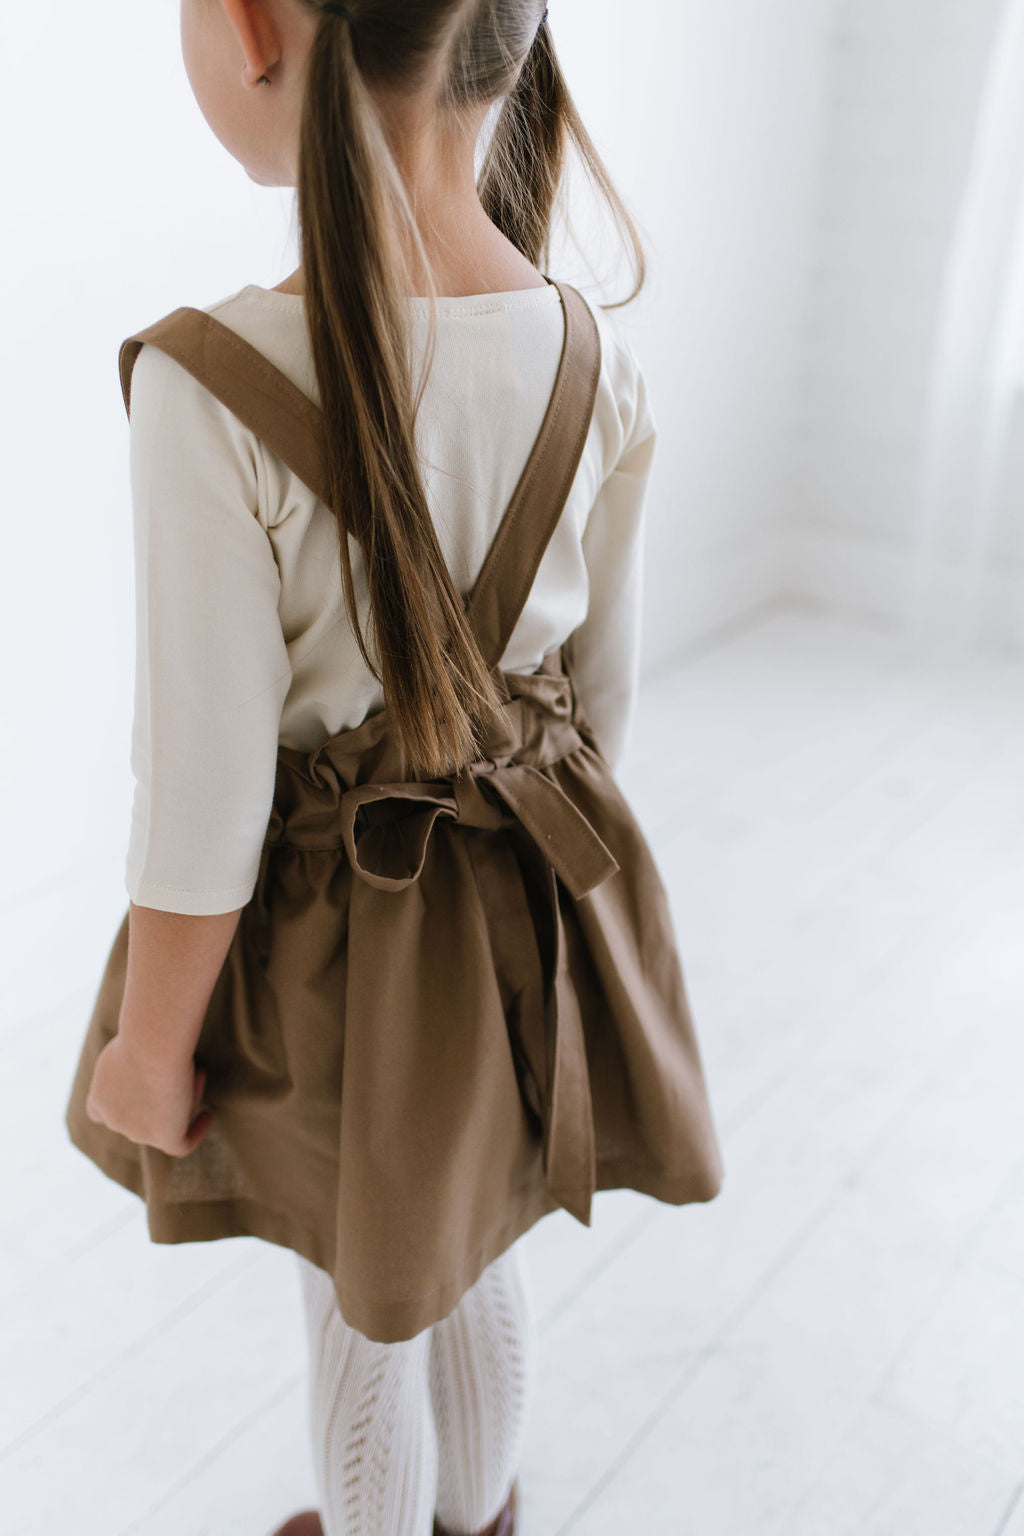 Molly Ballet Shirt in 'Cafe Au Lait' - Ready To Ship